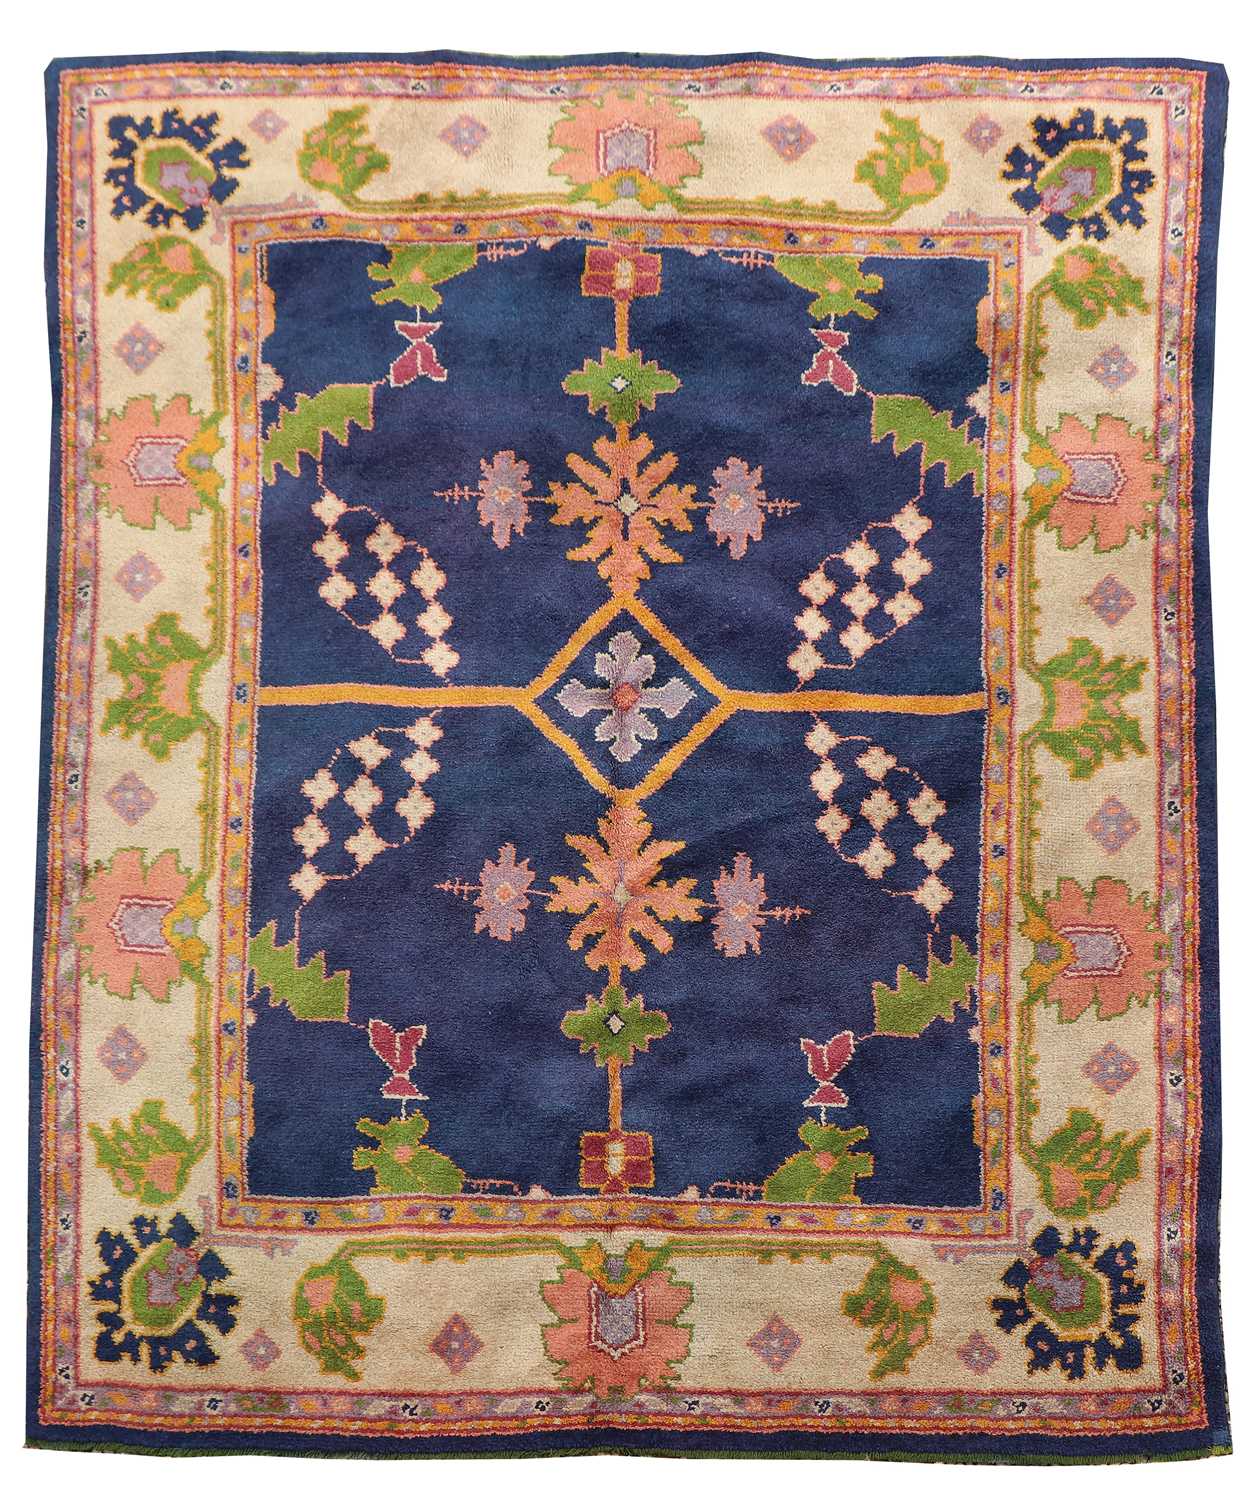 Lot 138 - An Arts and Crafts Donegal rug